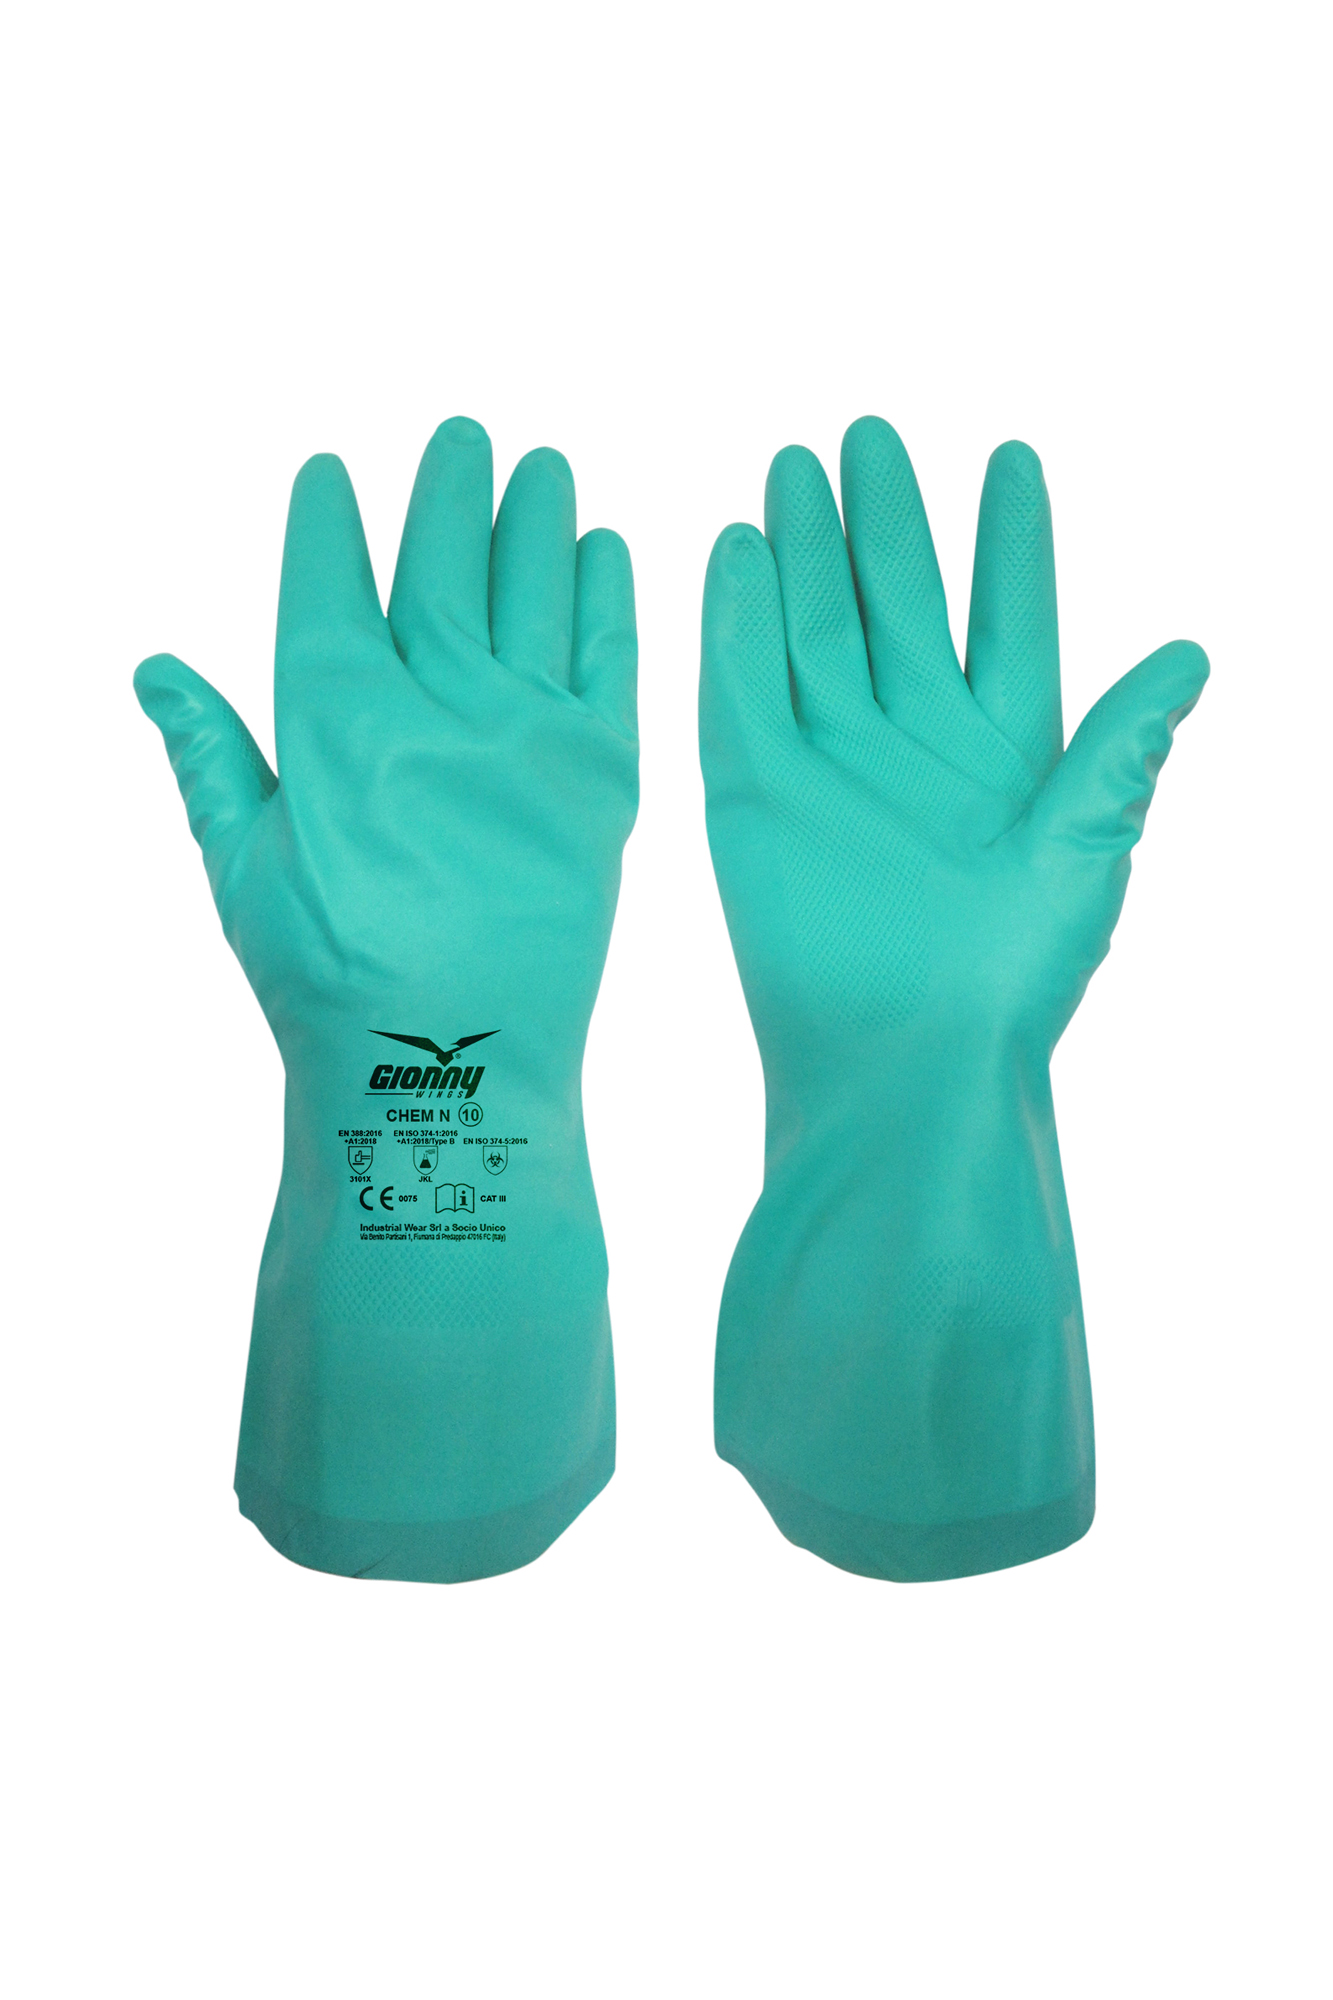 Gloves For Protection From Chemical Risks